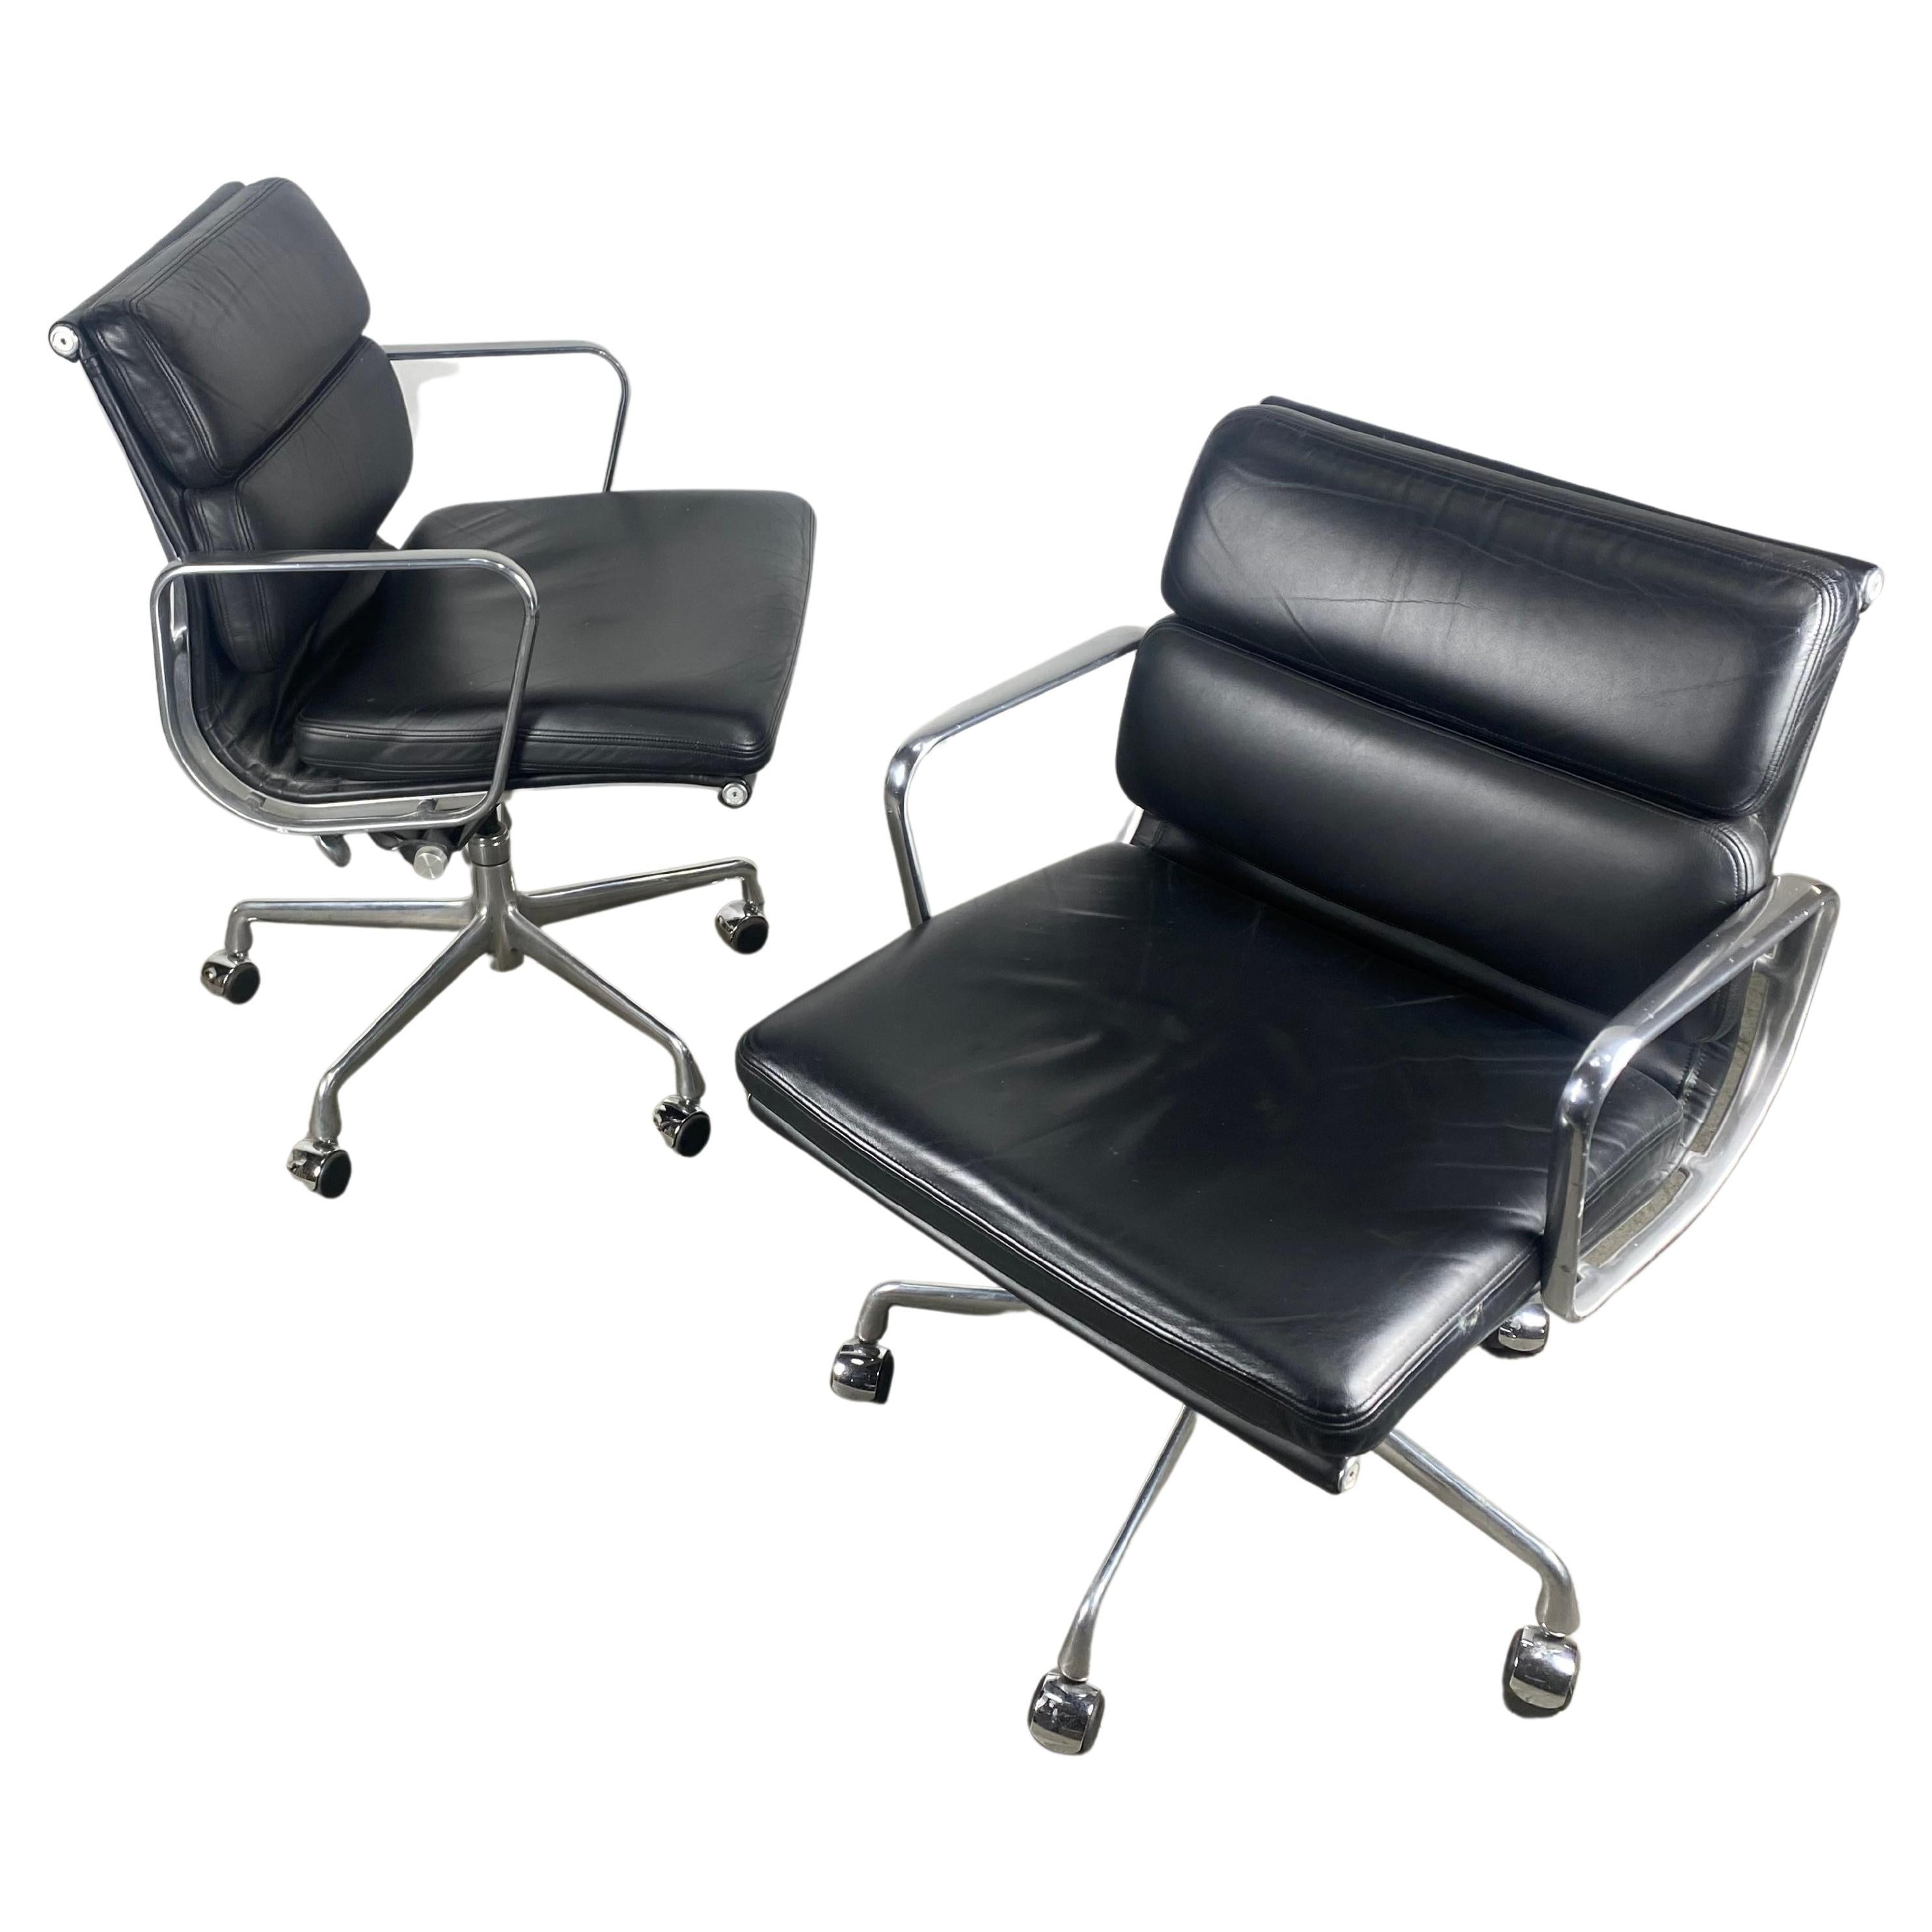 Charles Eames "Soft Pad" Aluminum and Leather Task Chairs